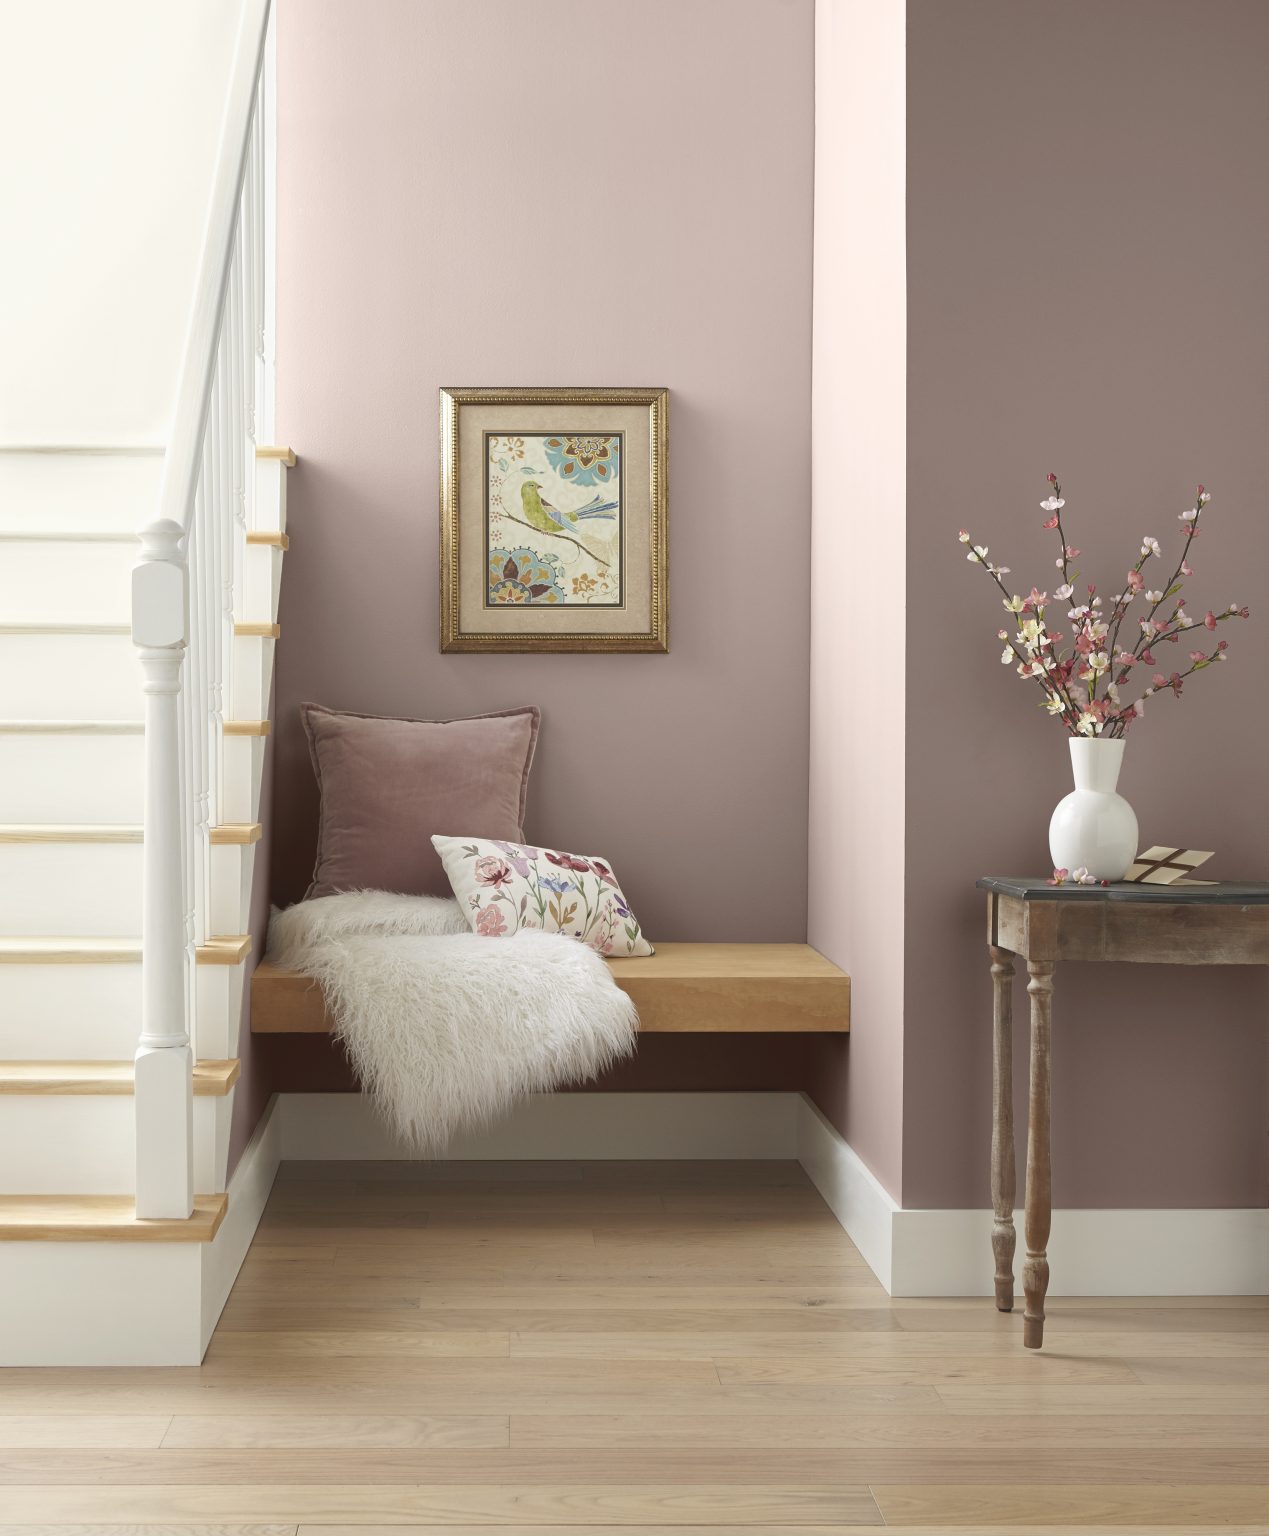 A small nook near the stairs with walls painted in a dusty pink colour, styled with neutral furniture and décor